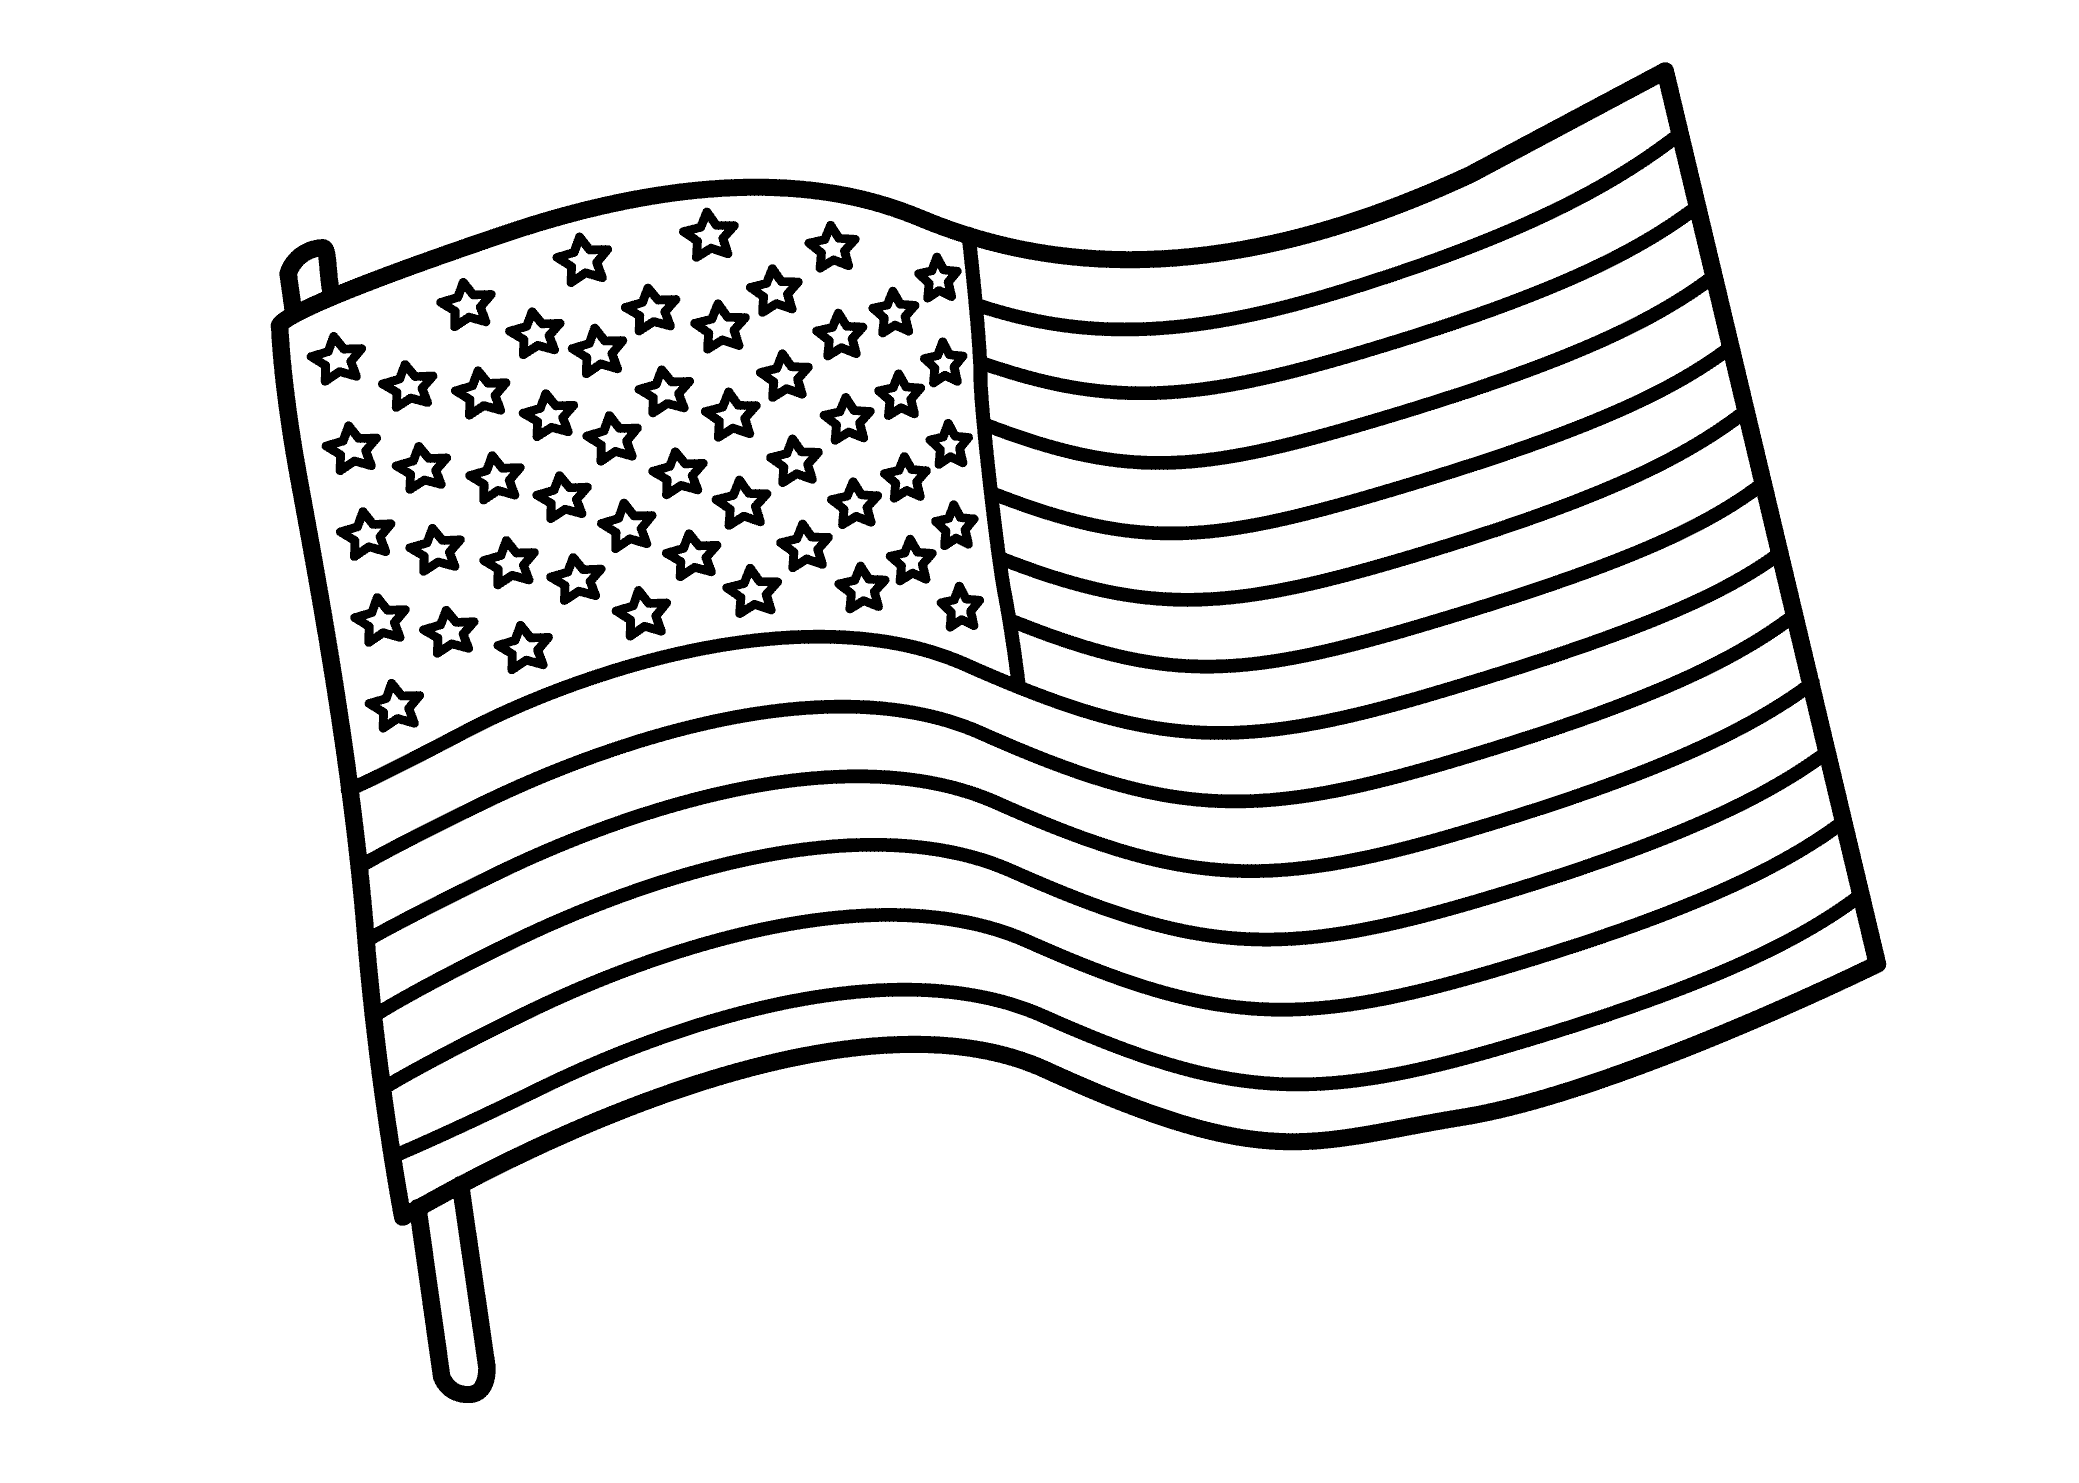 Inesyfederico clases: Flags Coloring Sheets